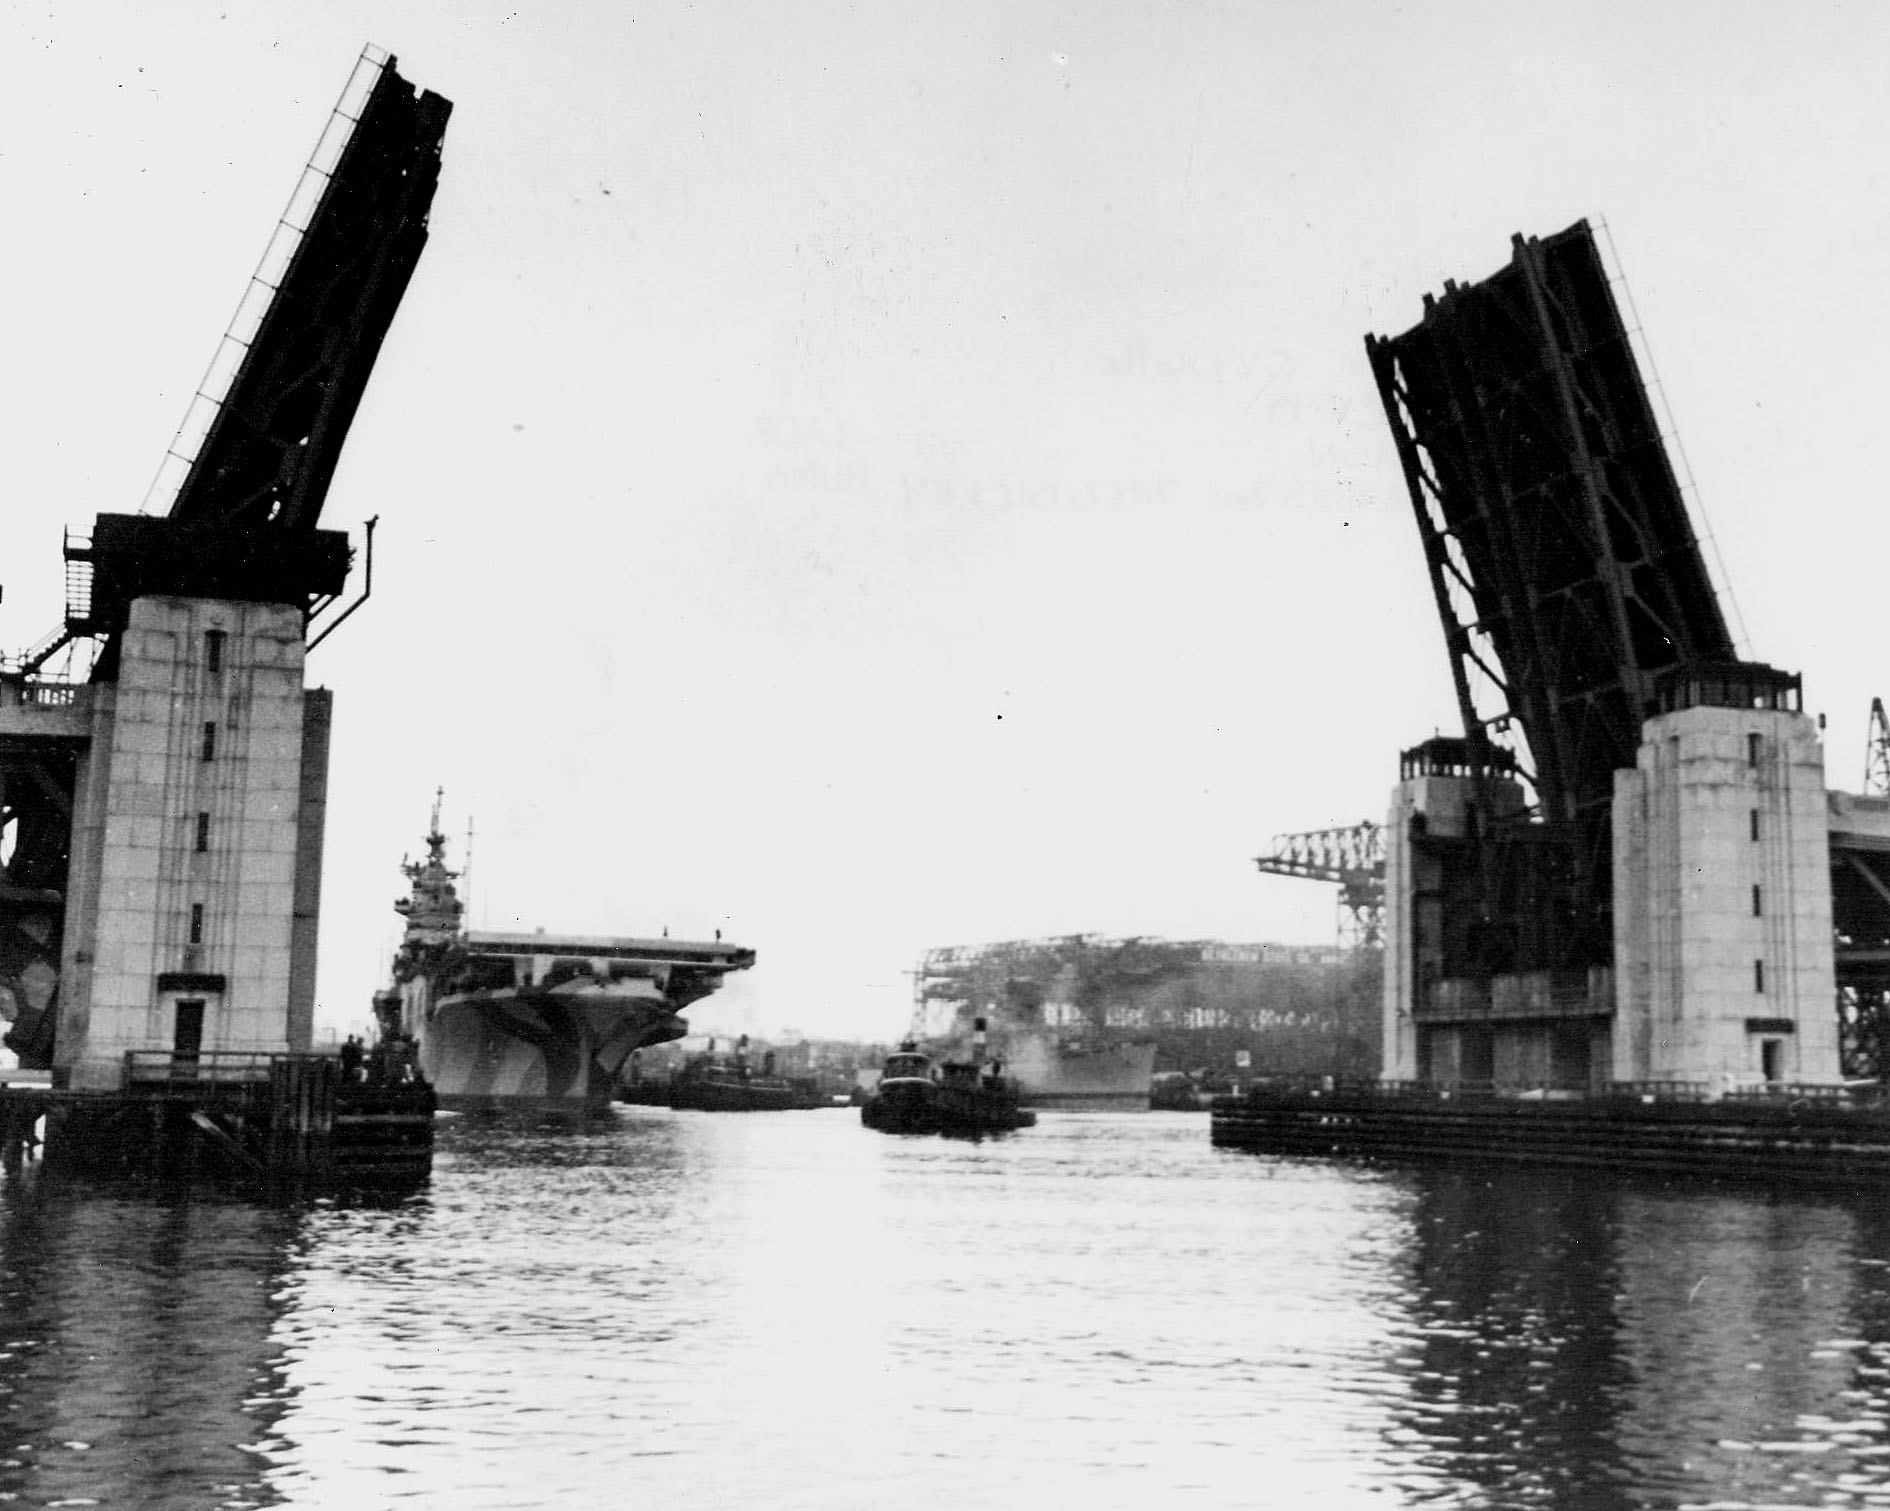 Essex-class Aircraft Carrier Hancock moving past the Fore River Bridge, Quincy, Massachusetts, United States, 14 Apr 1944, the day before her commissioning. Photo 1 of 2